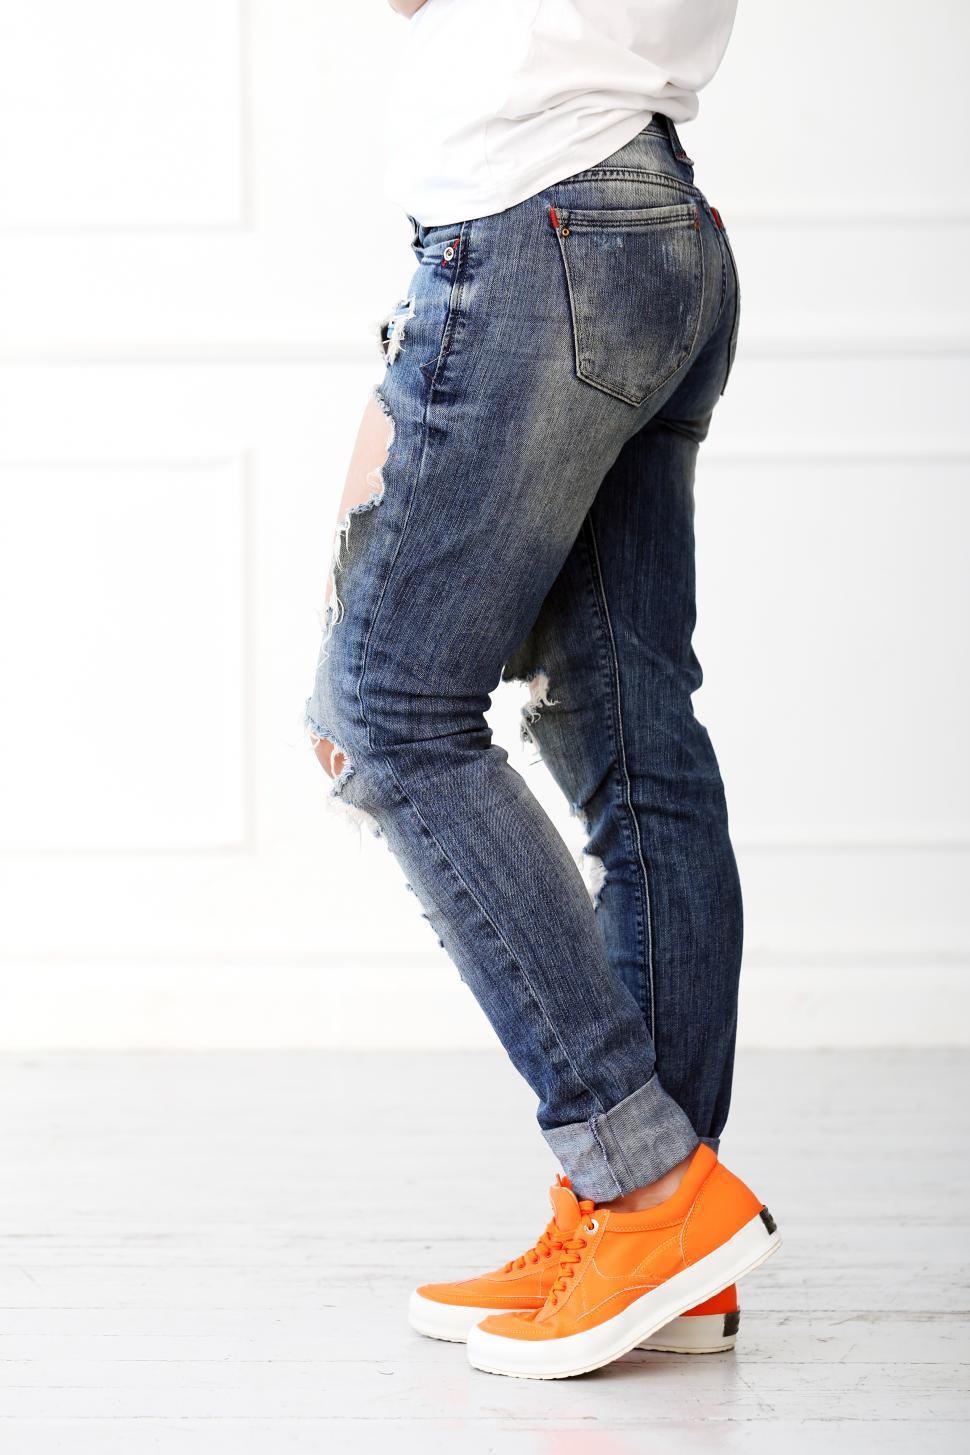 Free Image of Girl with orange shoes and ripped jeans 